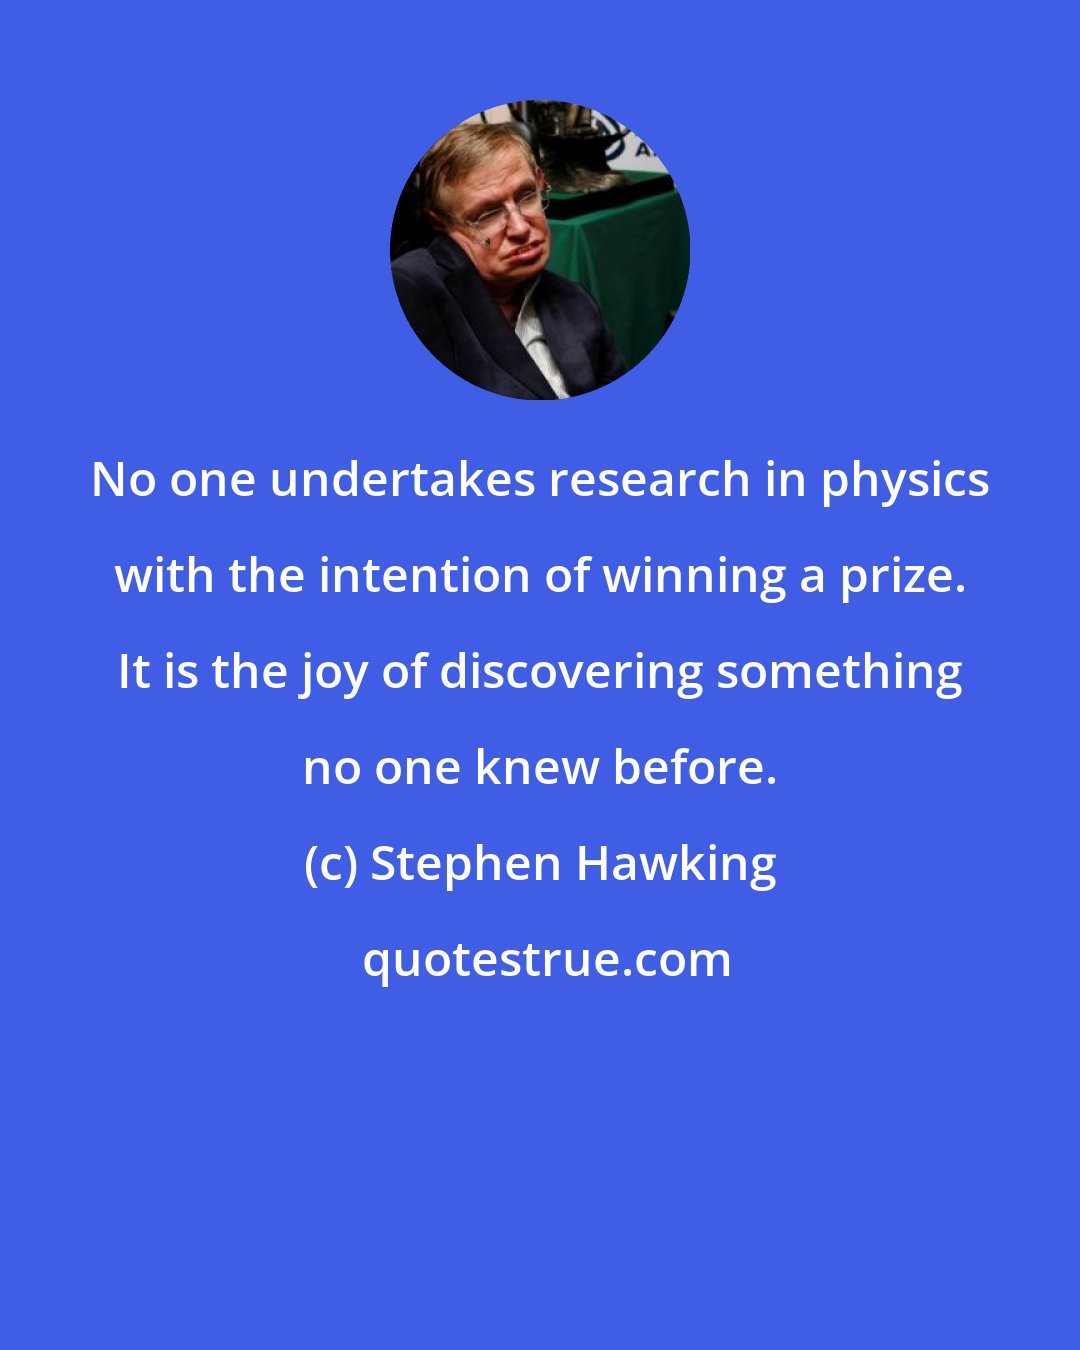 Stephen Hawking: No one undertakes research in physics with the intention of winning a prize. It is the joy of discovering something no one knew before.